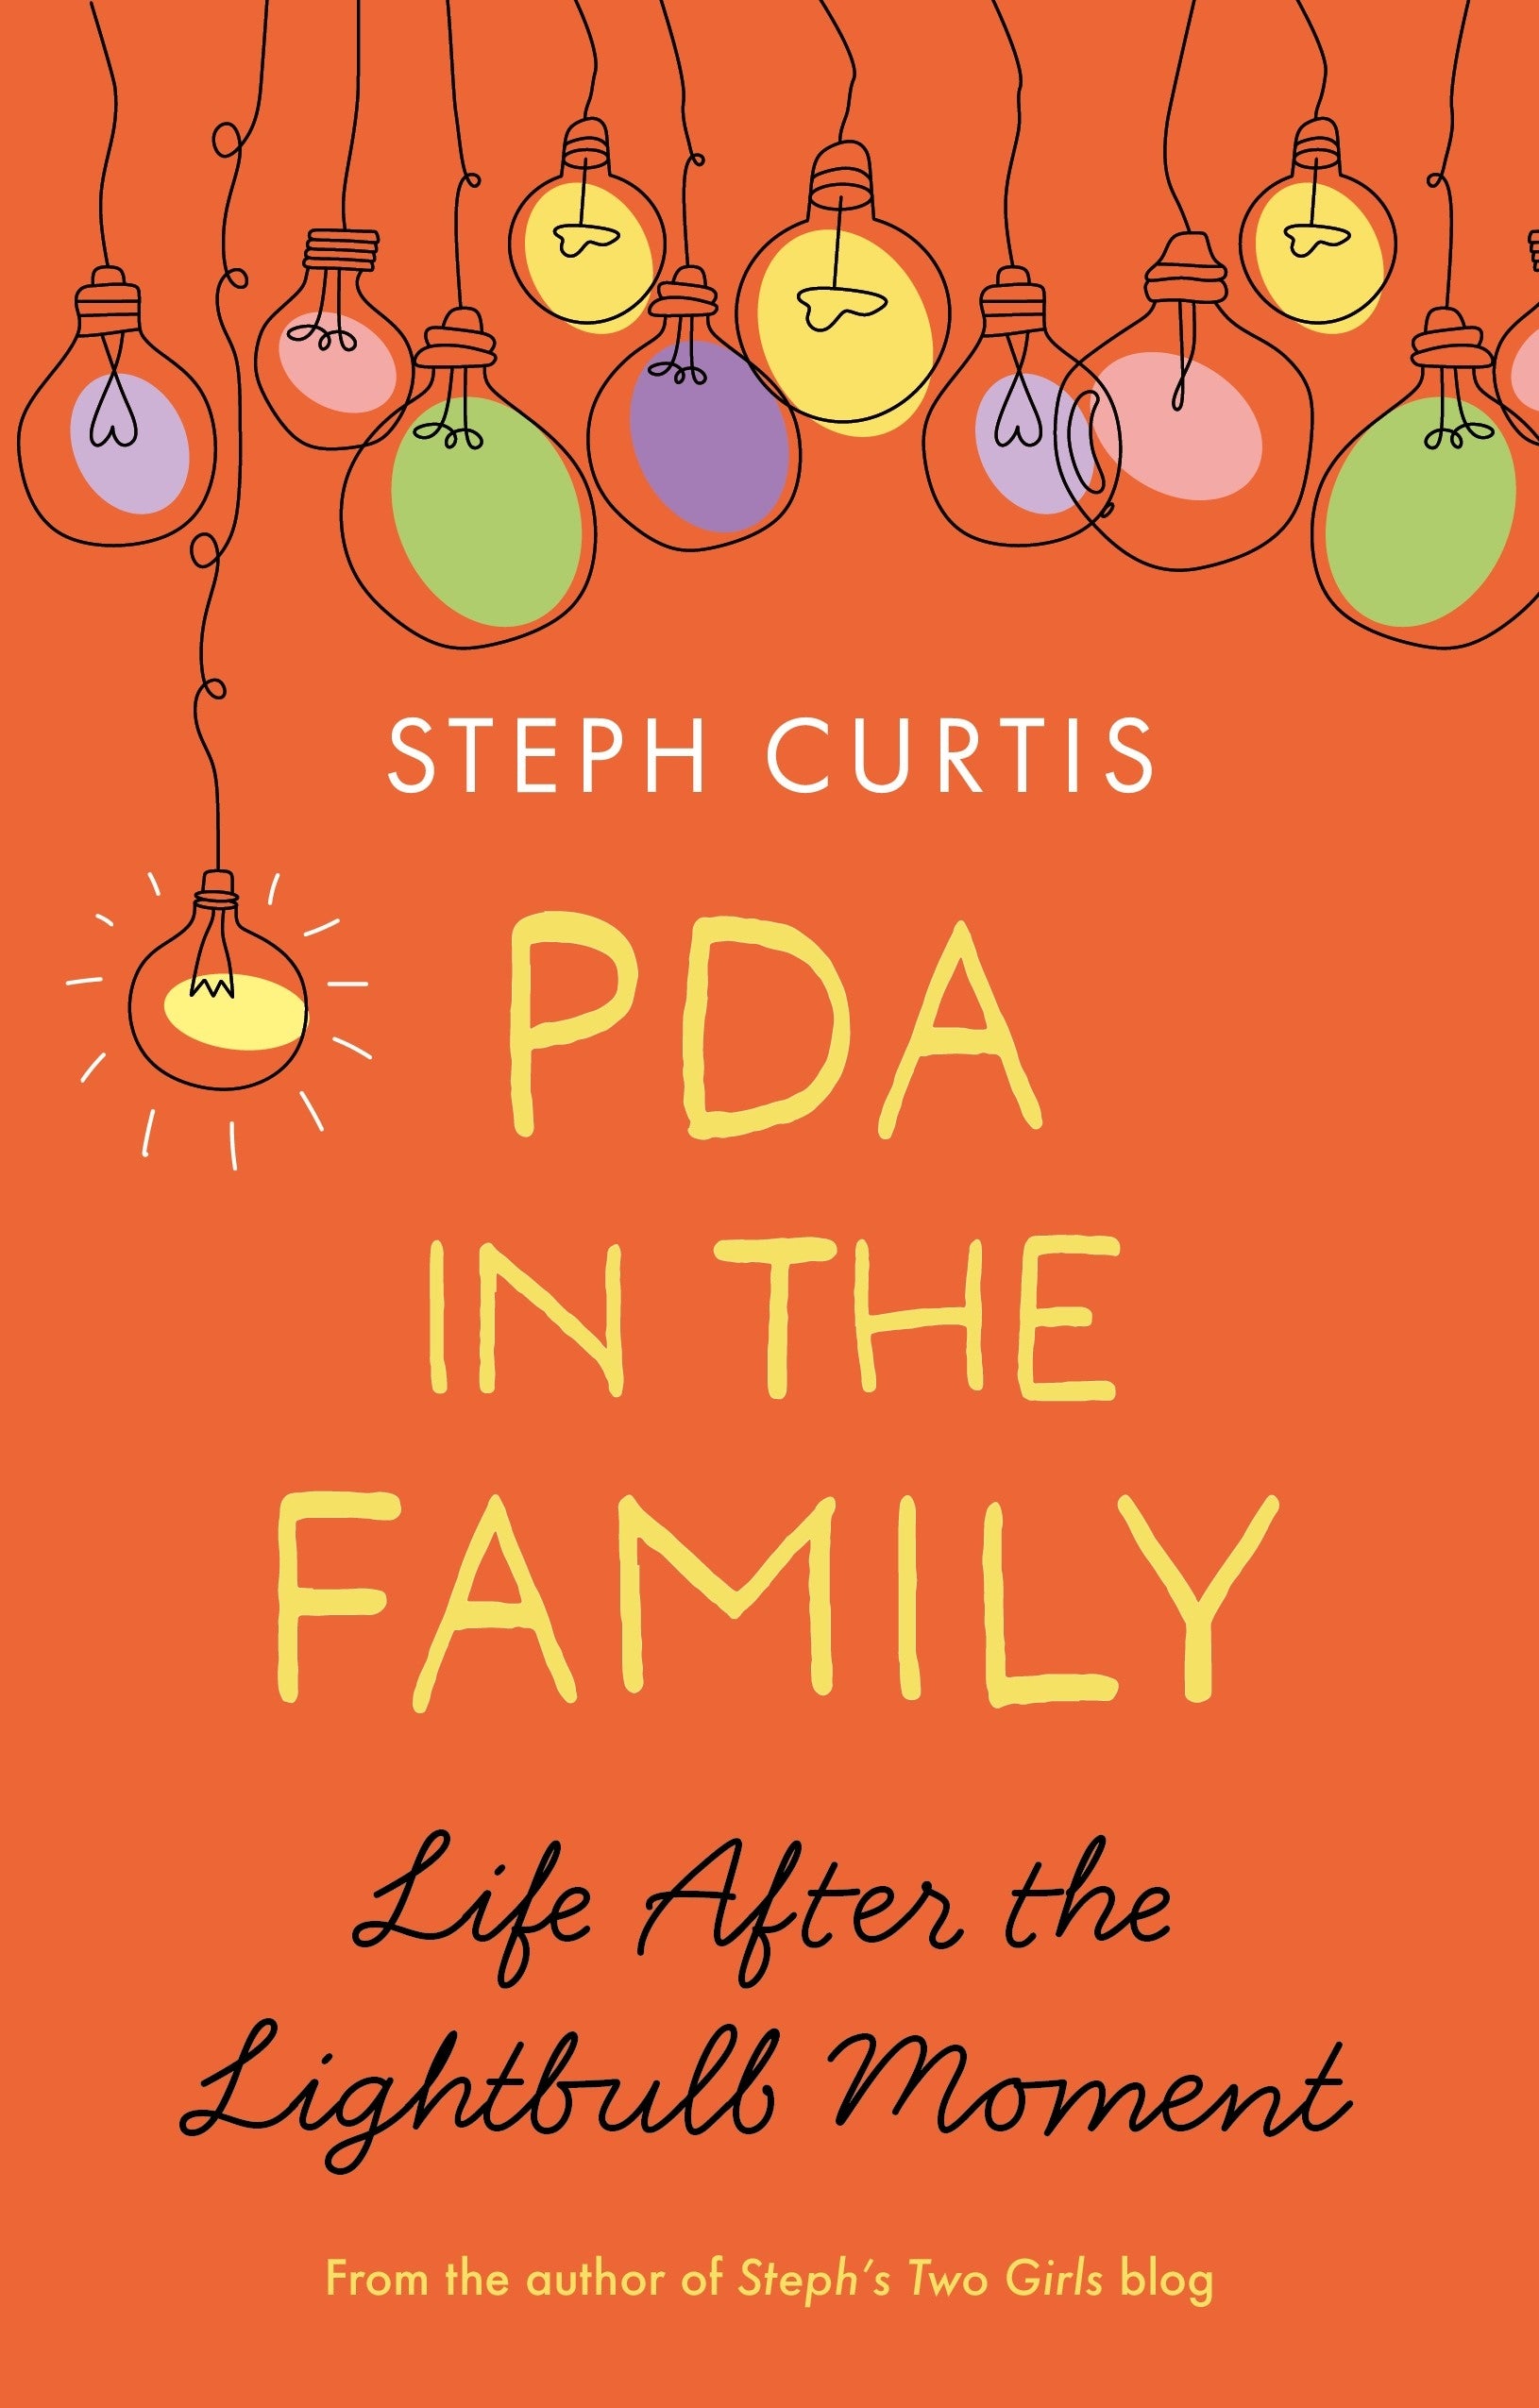 PDA in the Family by Steph Curtis